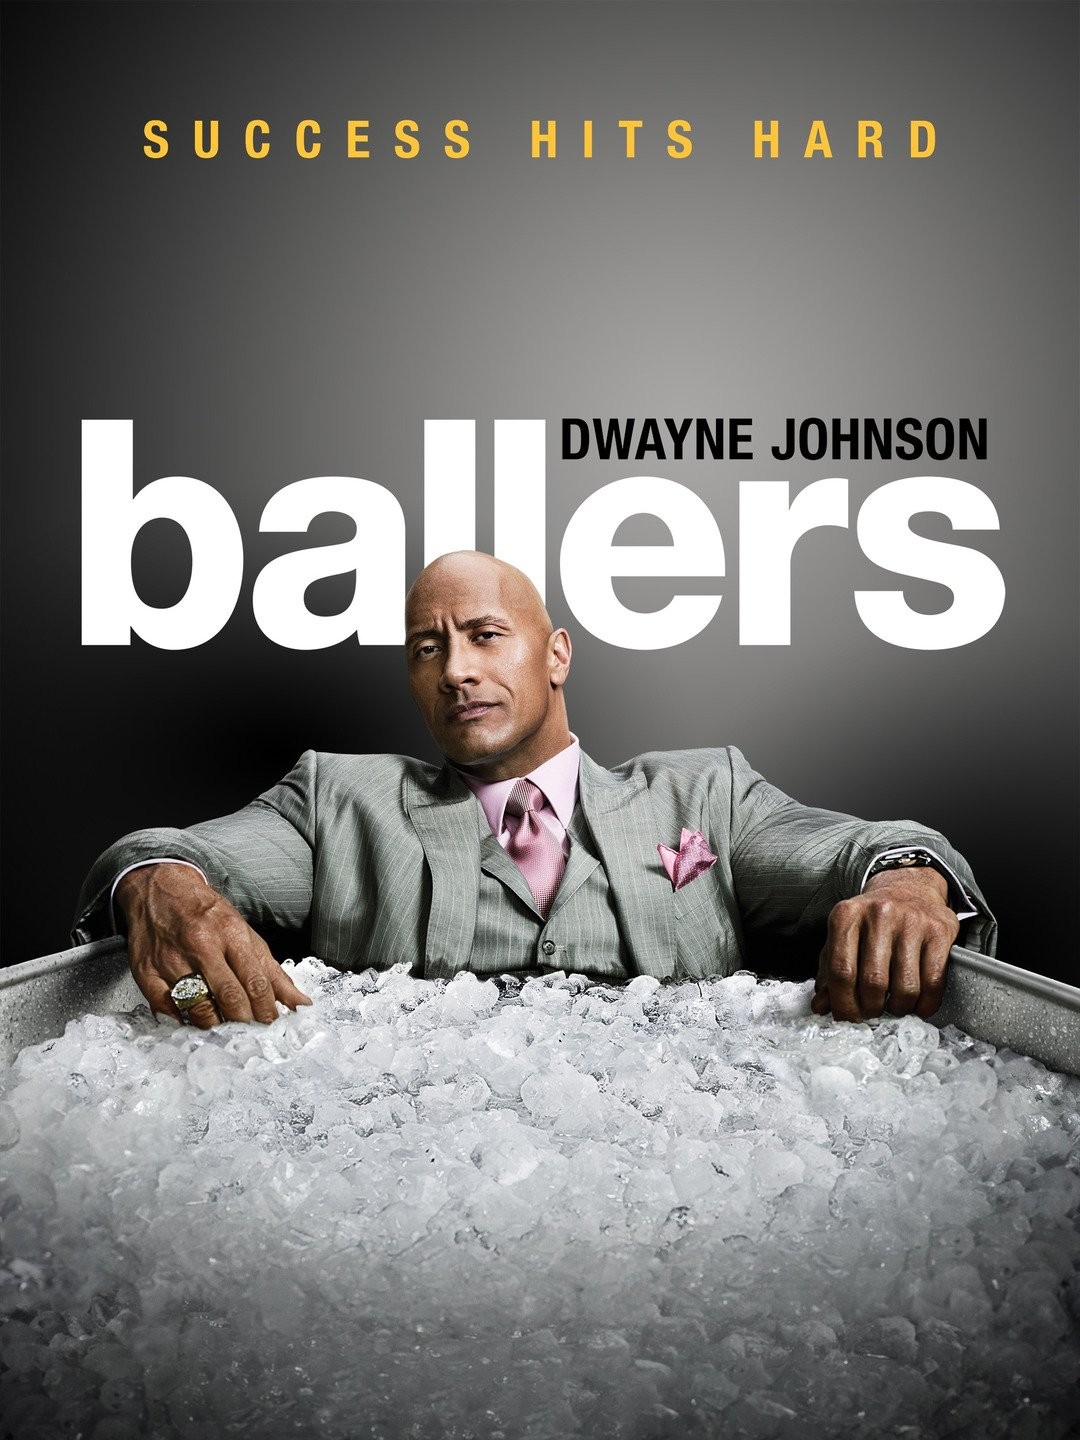 Movies Starring The Rock: Dwayne Johnson's Career in Posters – IndieWire